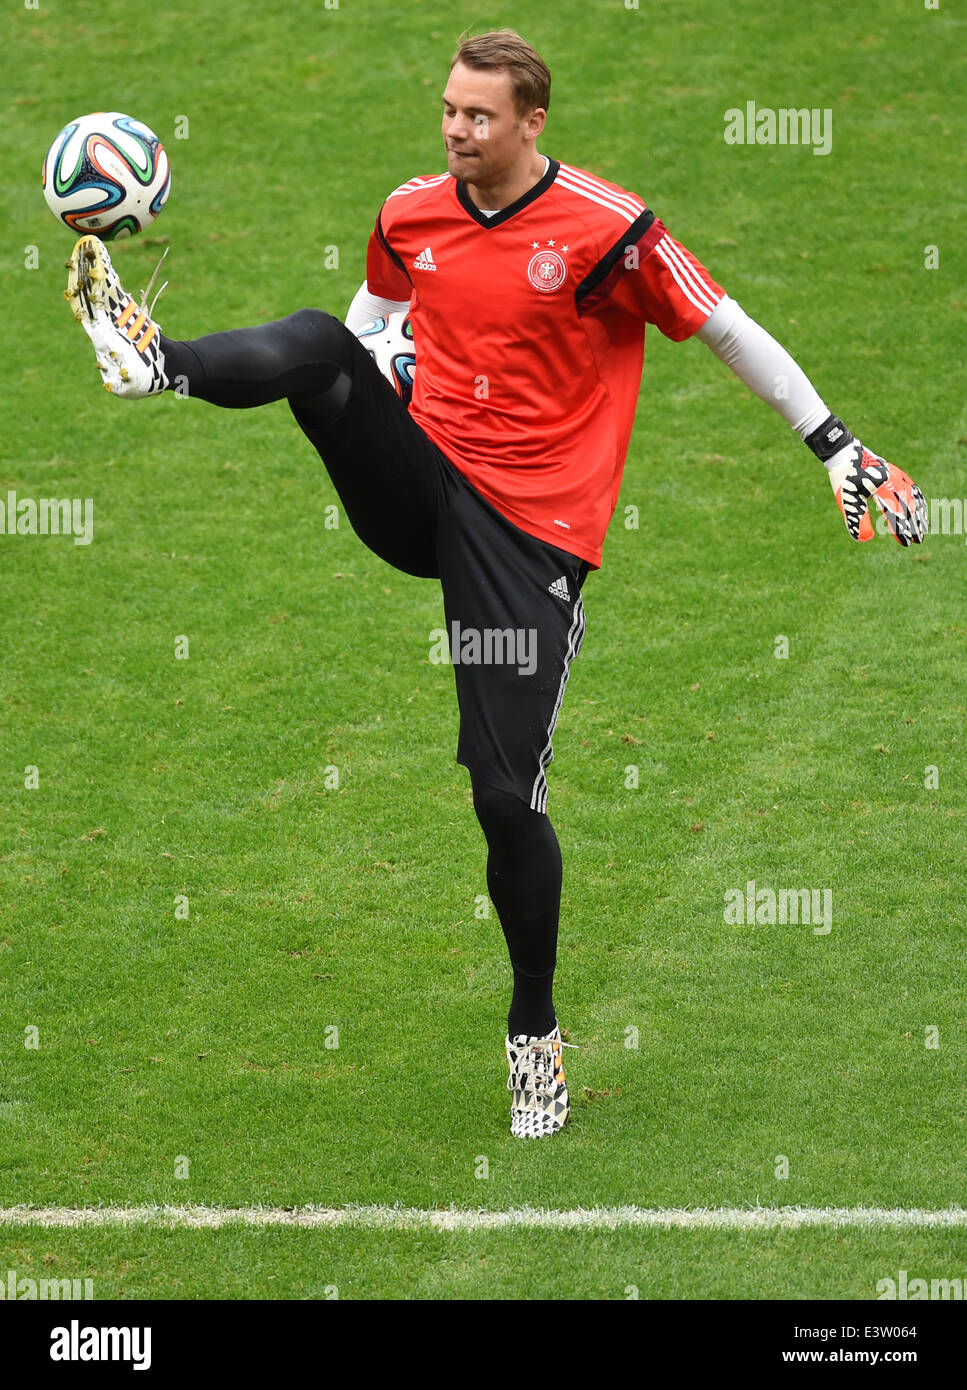 Porto Alegre, Brazil. 29th June, 2014. Germany's goal keeper Manuel Neuer during a training session at the Estadio Beira-Rio in Porto Alegre, Brazil, 29 June 2014. Germany faces Algeria in a FIFA soccer World Cup round of sixteen match on 30 June 2014. Photo: Marcus Brandt/dpa/Alamy Live News Stock Photo